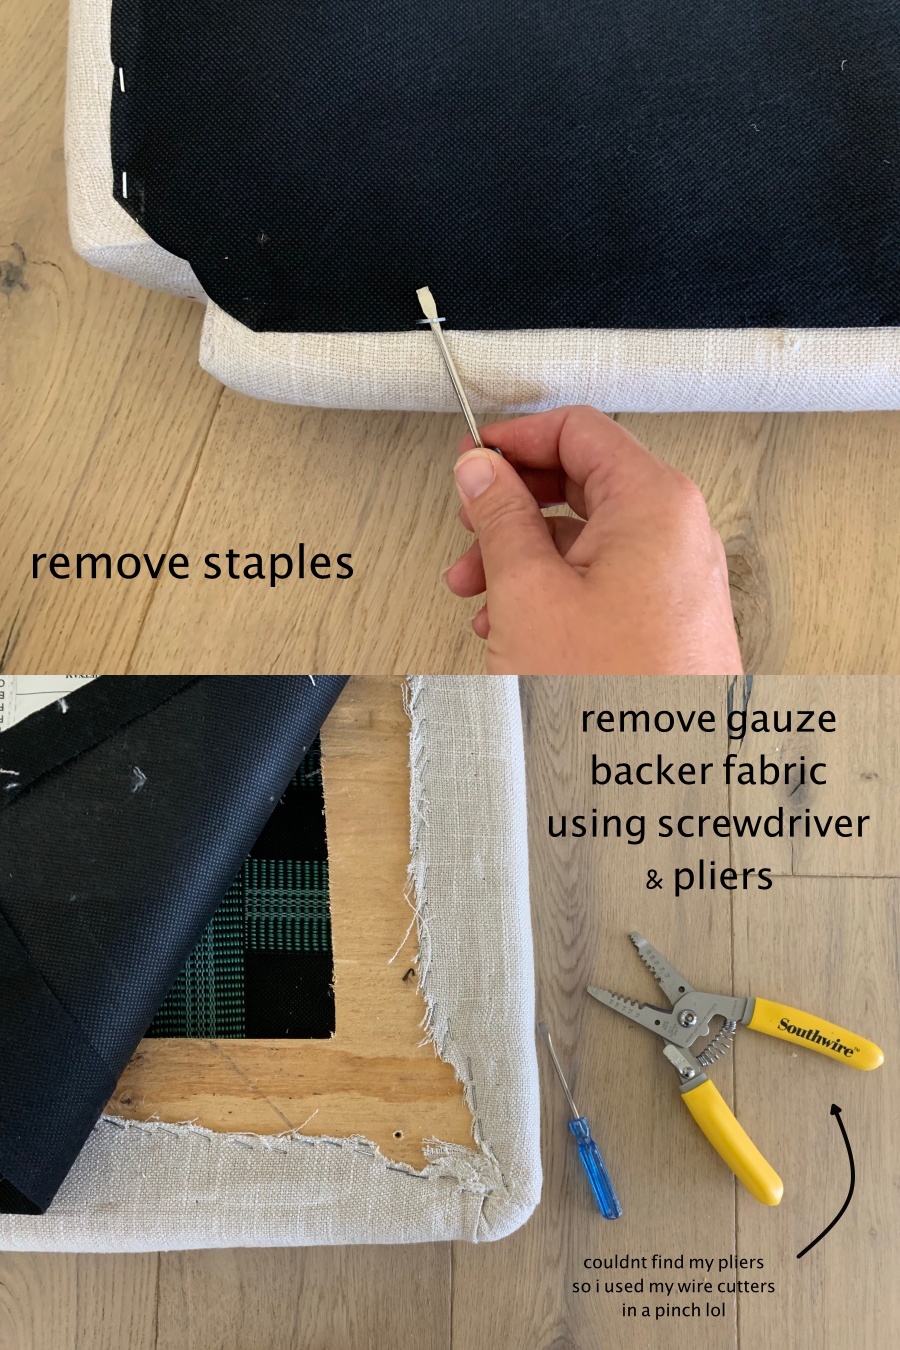 How To Reupholster Bar Stools Be Kid, How To Recover Bar Stools With Backs